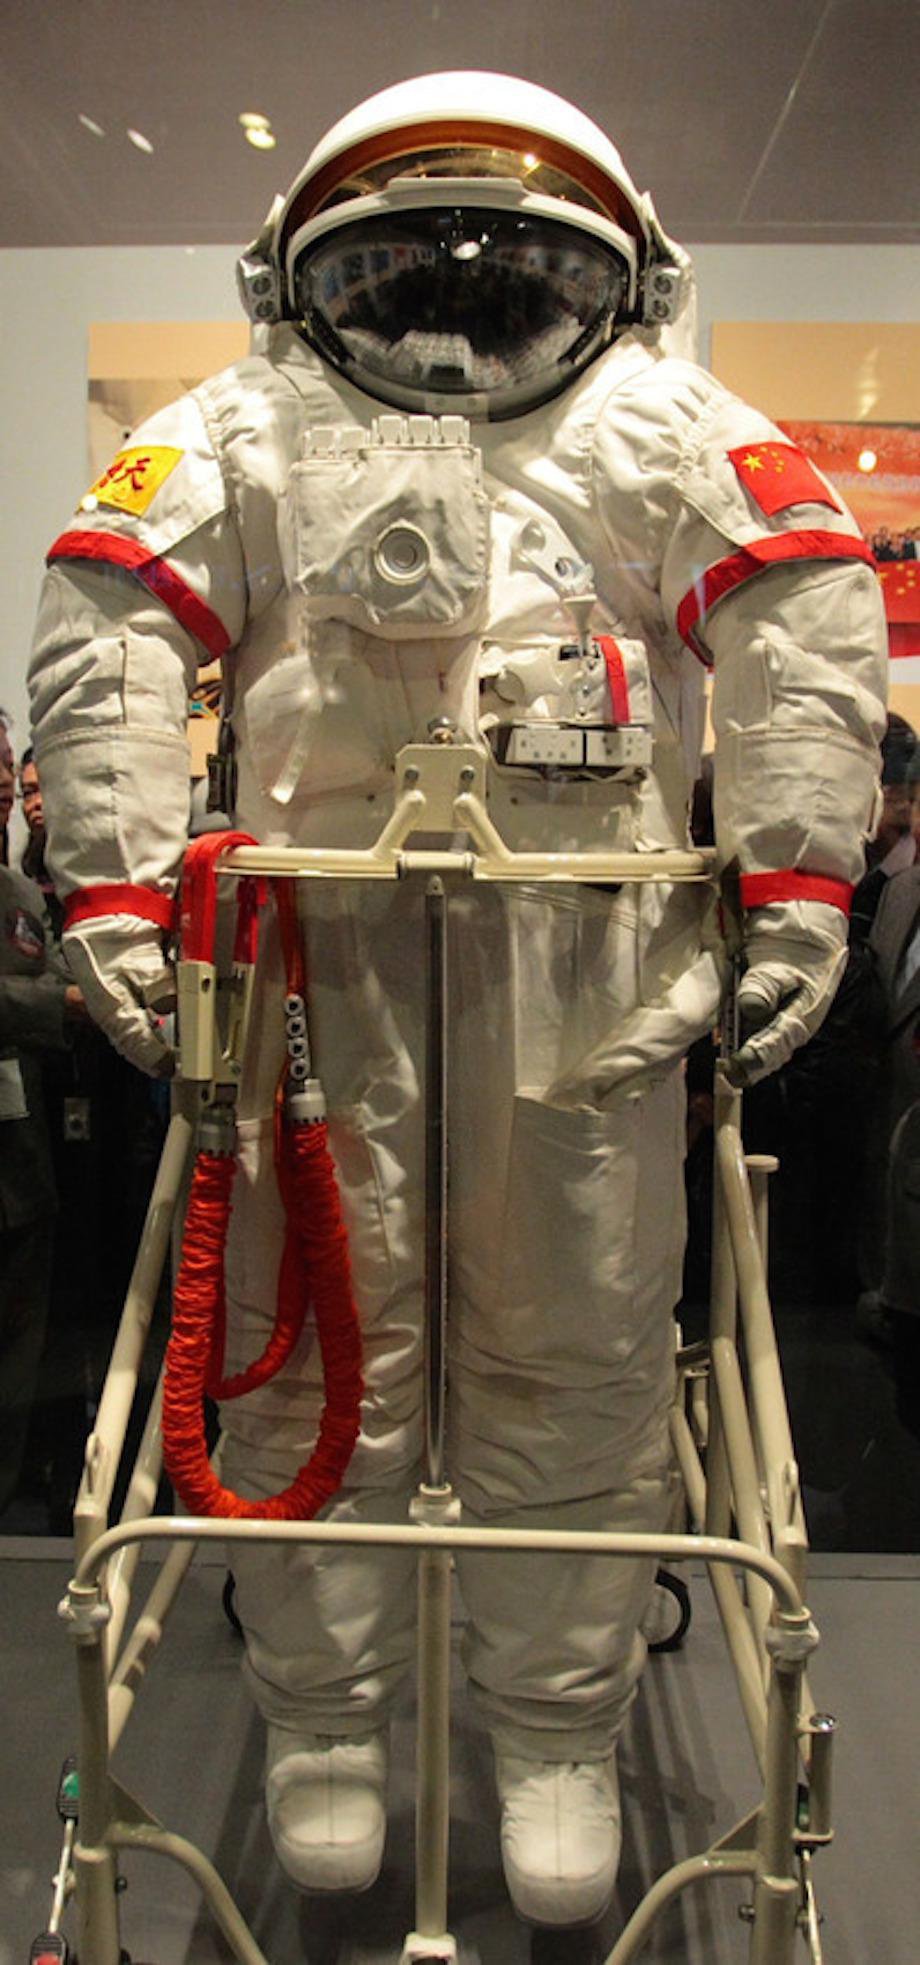 check-out-the-evolution-of-the-space-suit-41-hq-photos-29